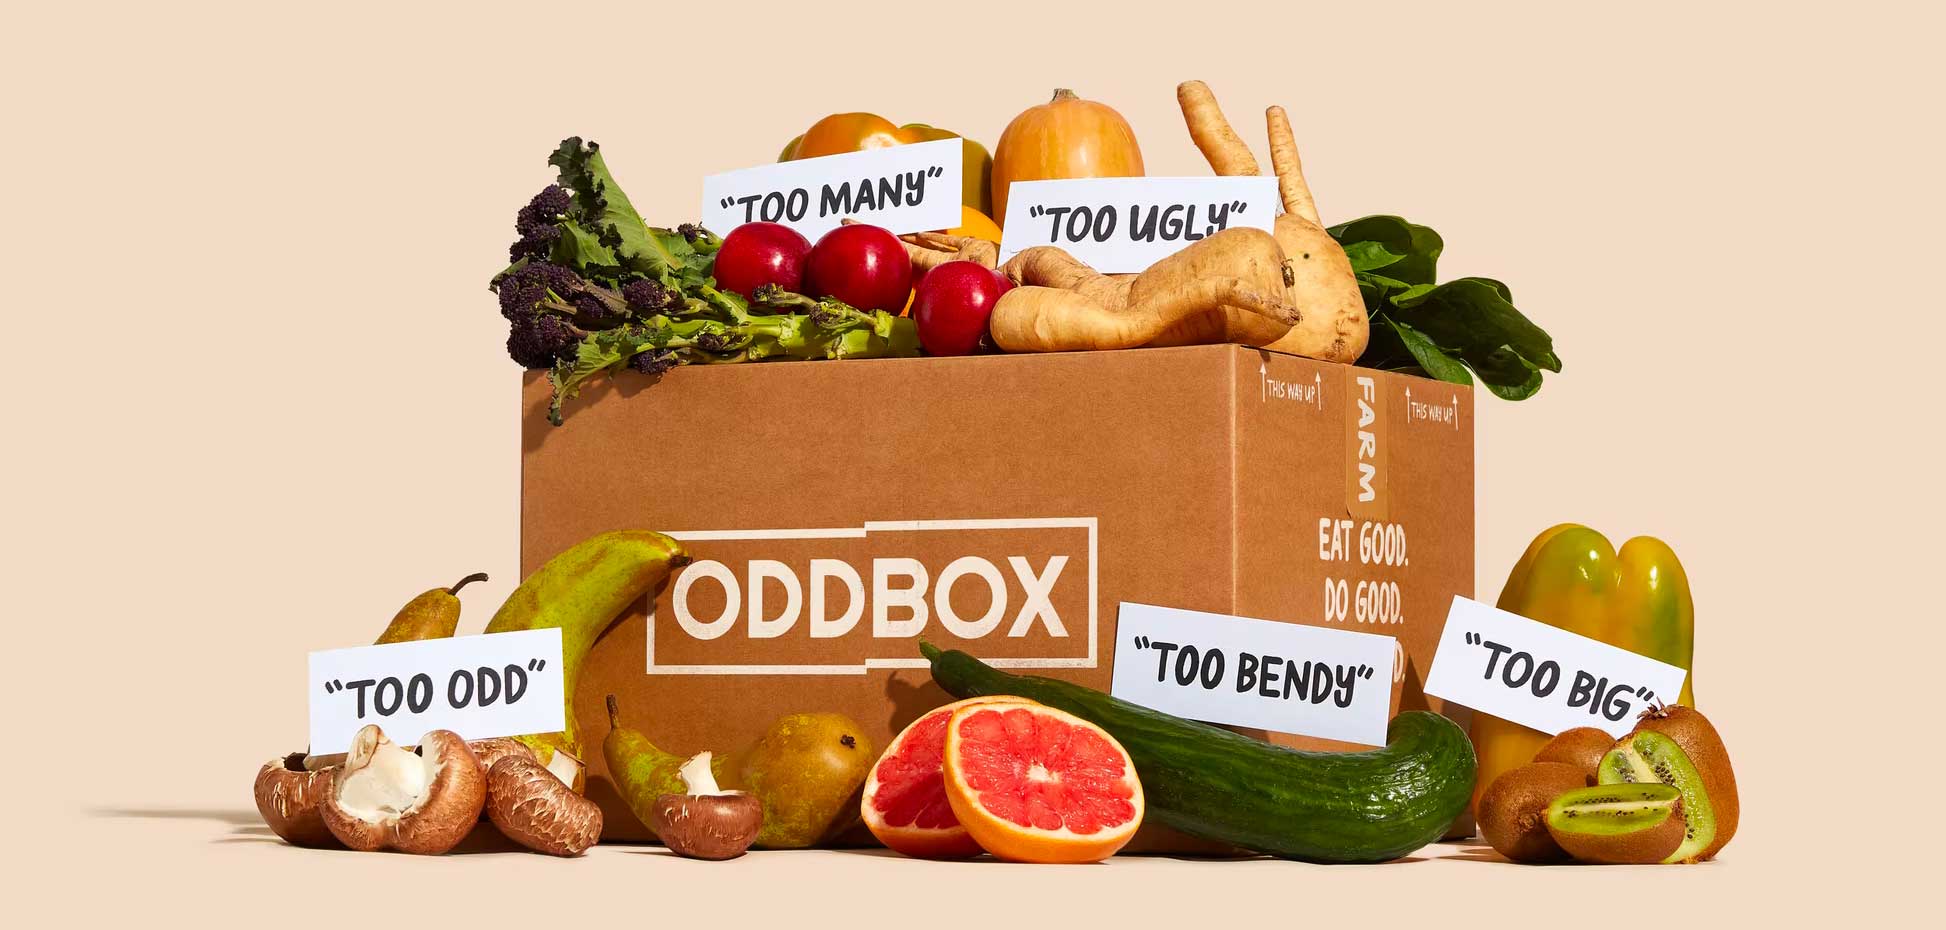 Oddbox box piled with fruit and vegetables labelled "too many", "too odd", etc.